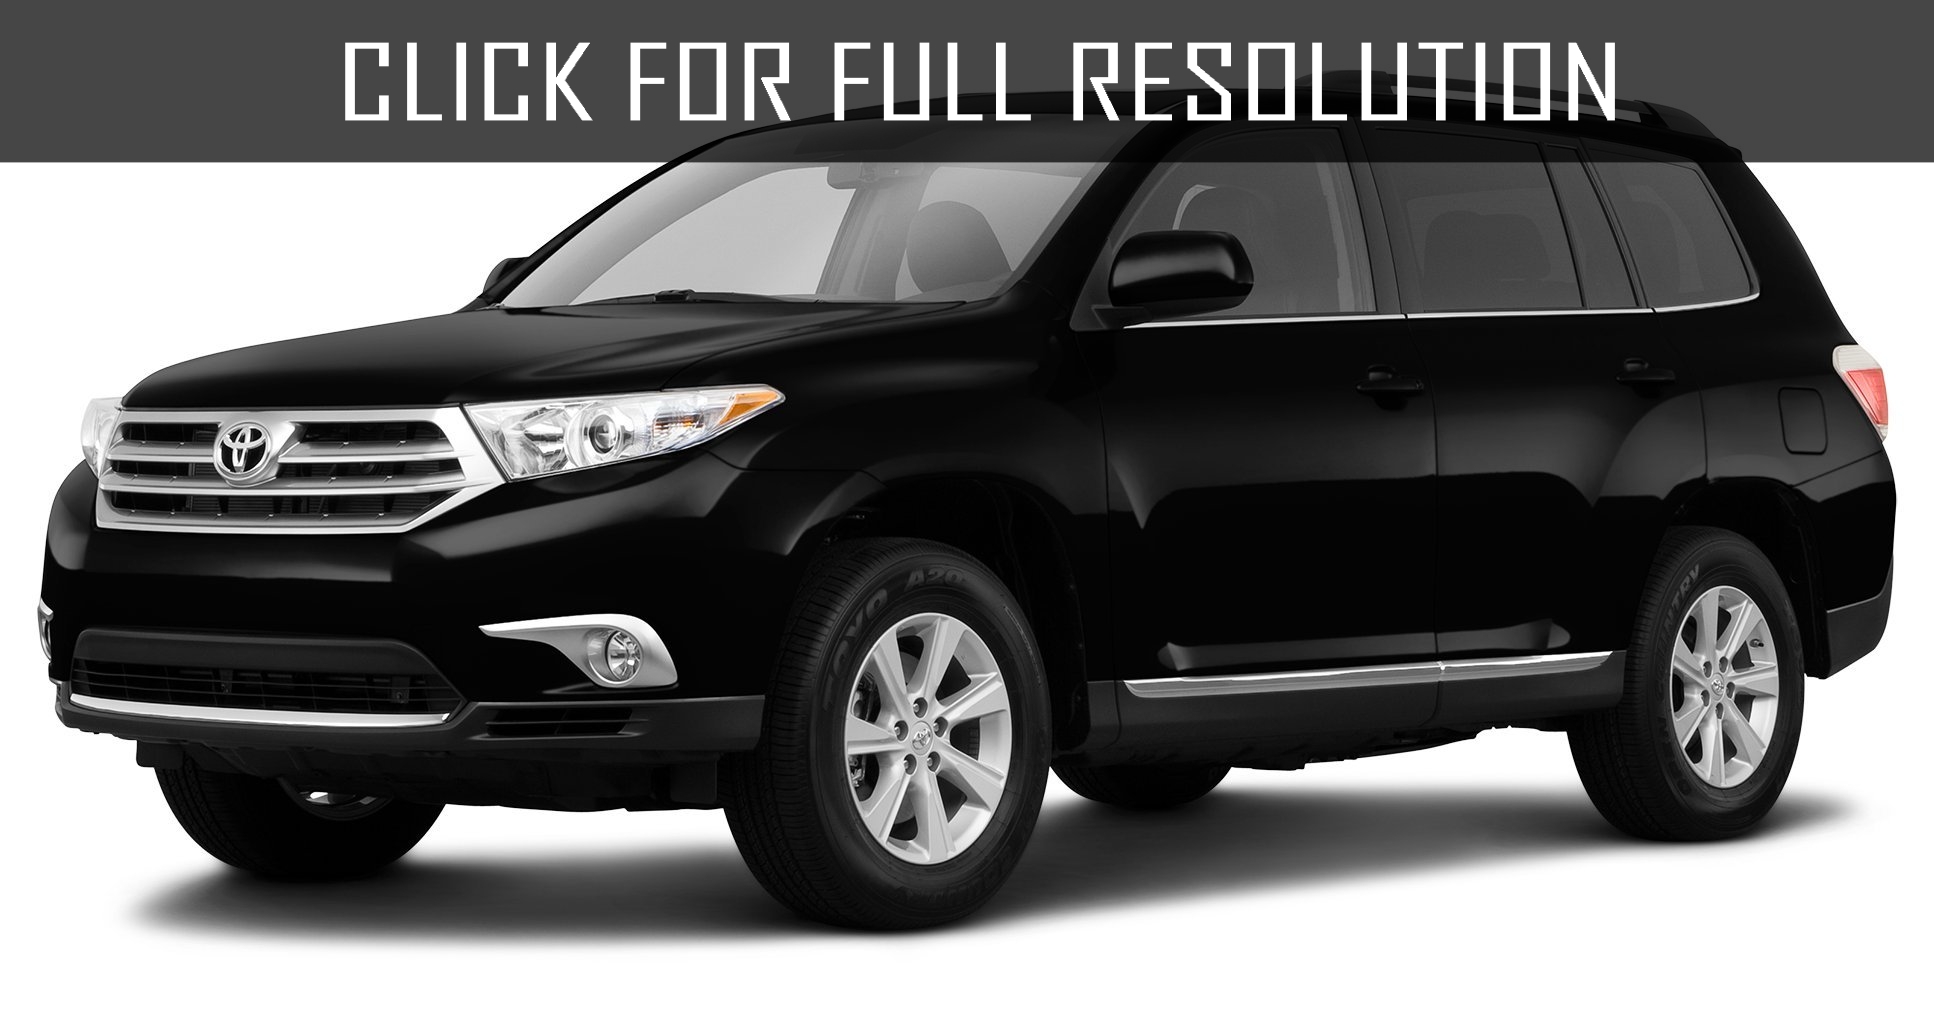 Toyota Highlander Black amazing photo gallery, some information and